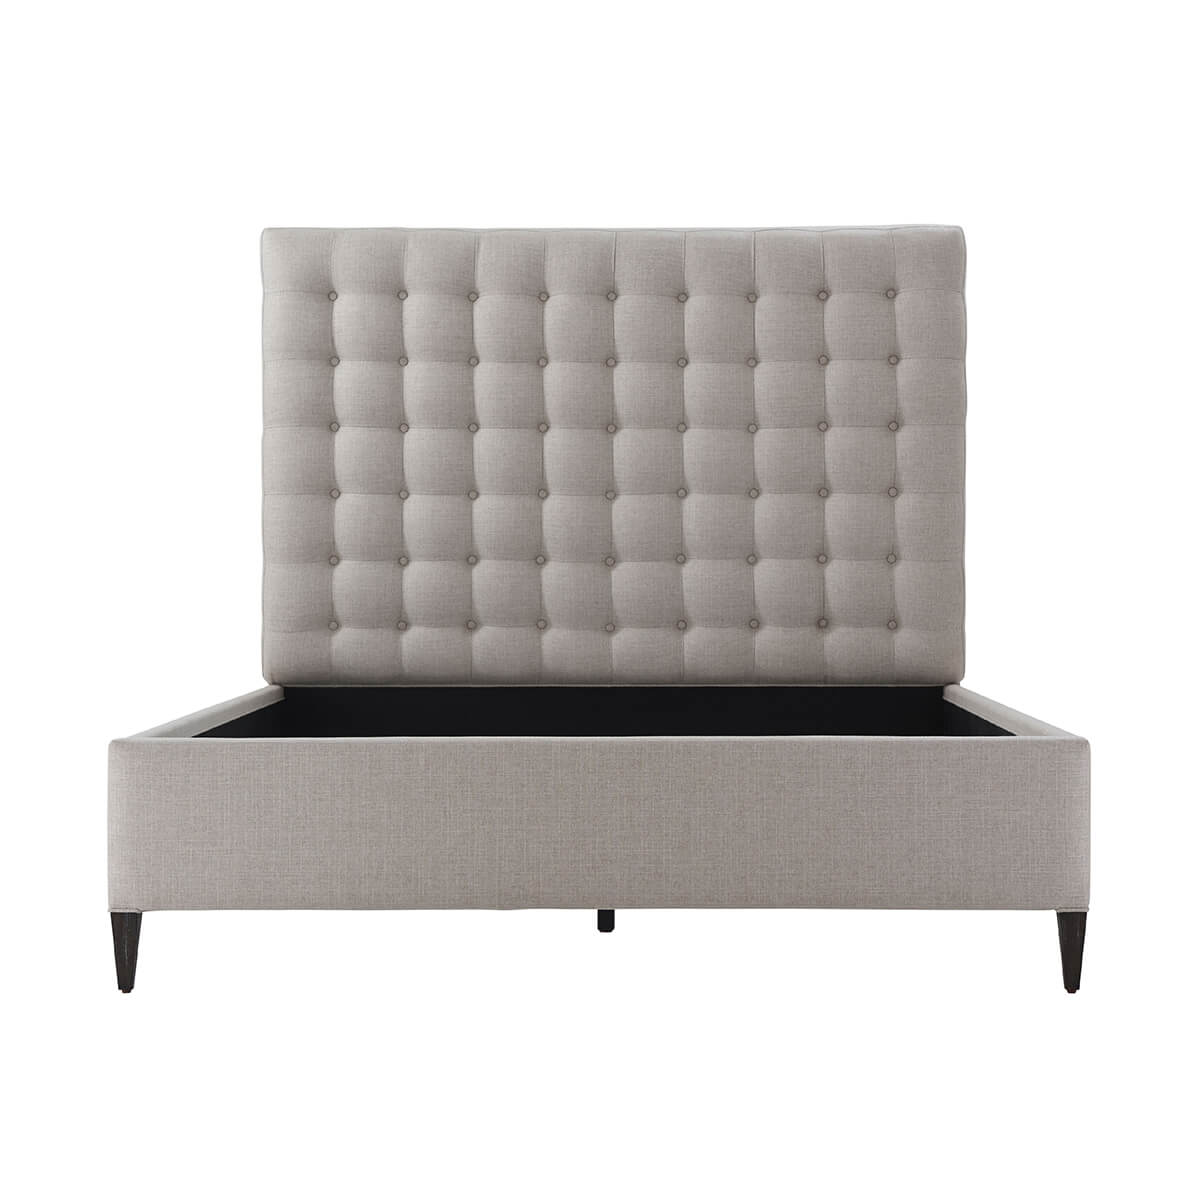 Art Deco Inspired Tufted Queen Bed - English Georgian America